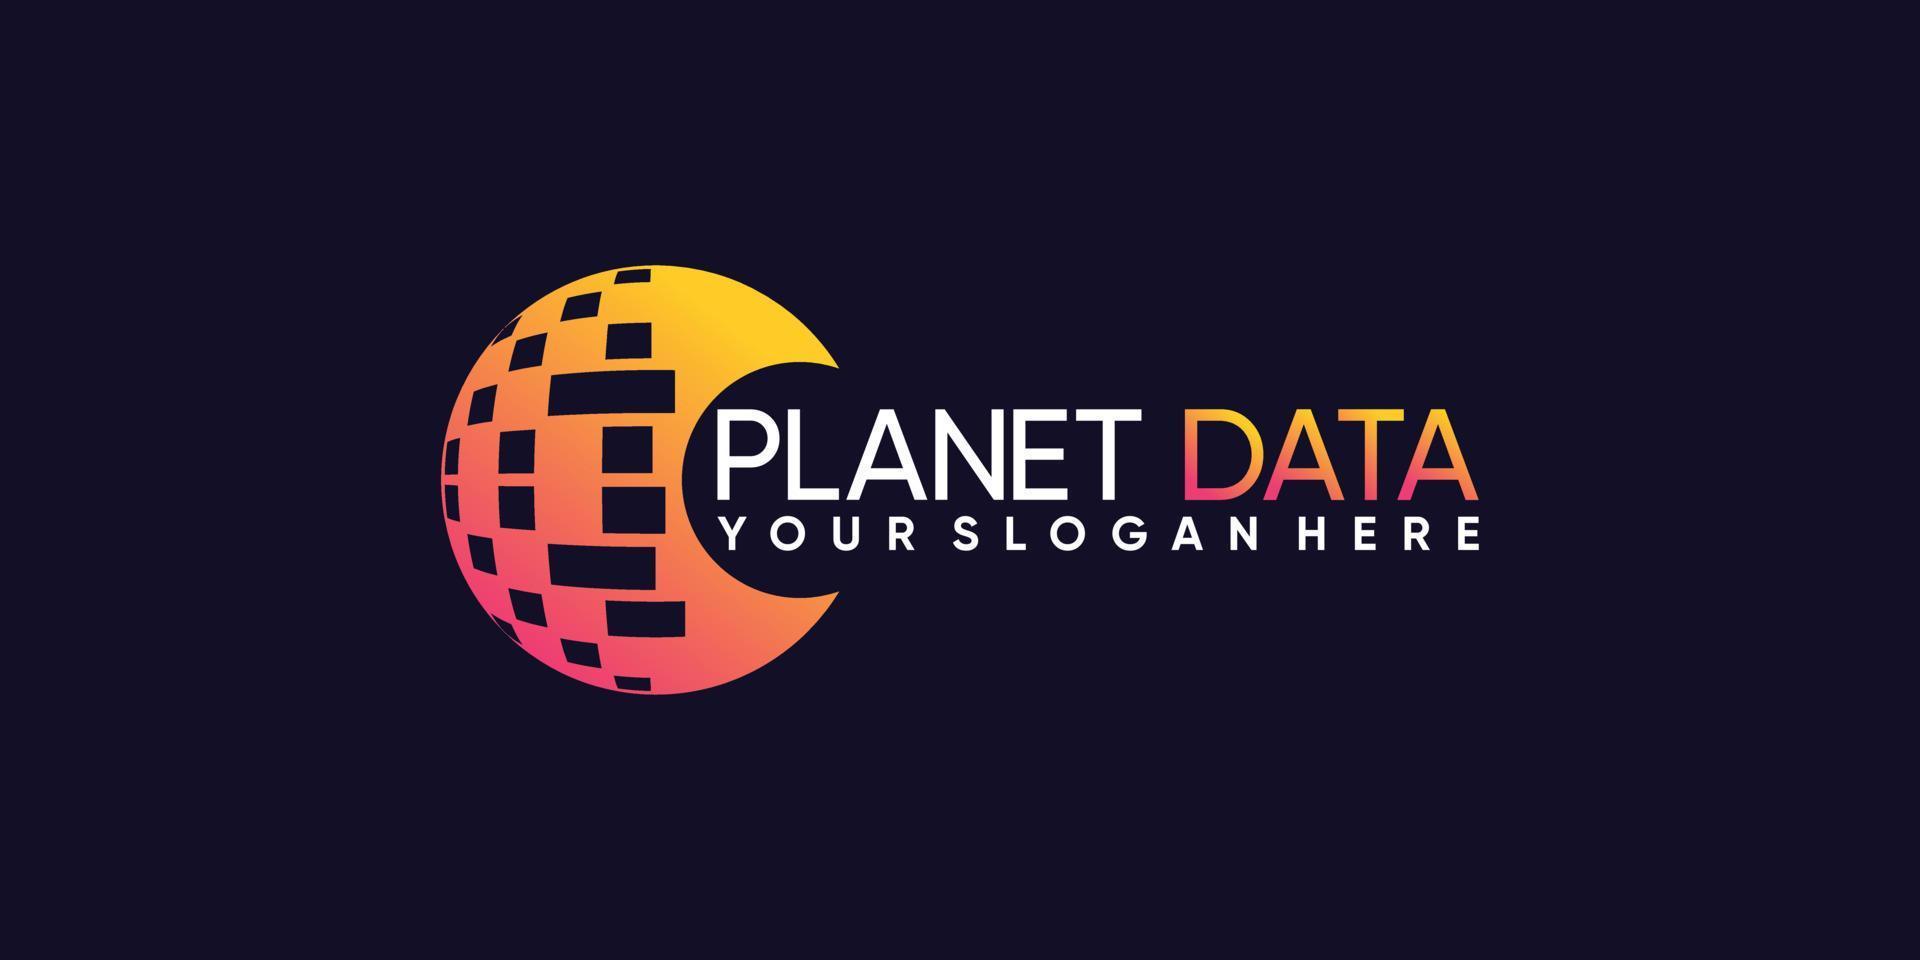 Creative global planet logo design for data technology with circle concept Premium Vector